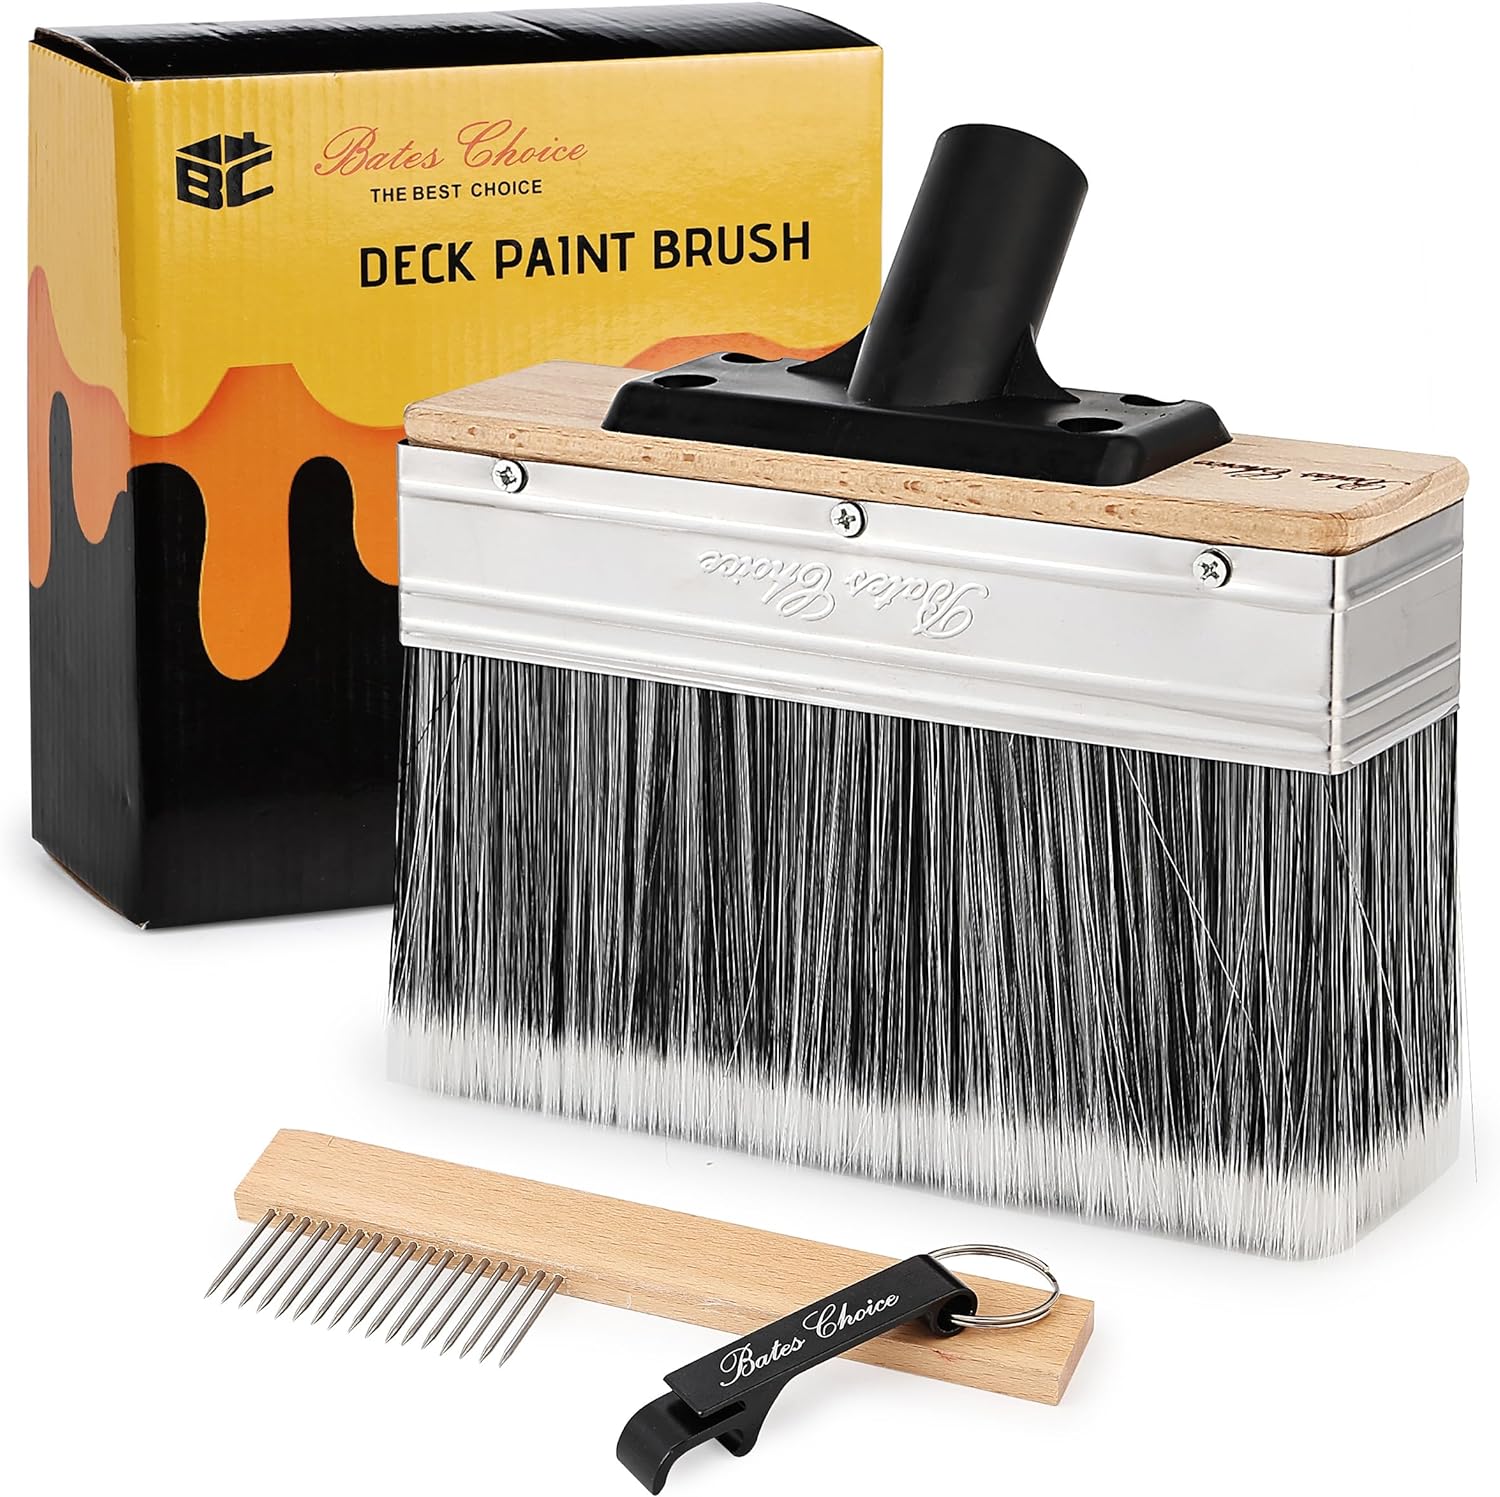 Deck Stain Brush, 7.5-Inch, Stain Brushes for Wood - Bates Choice